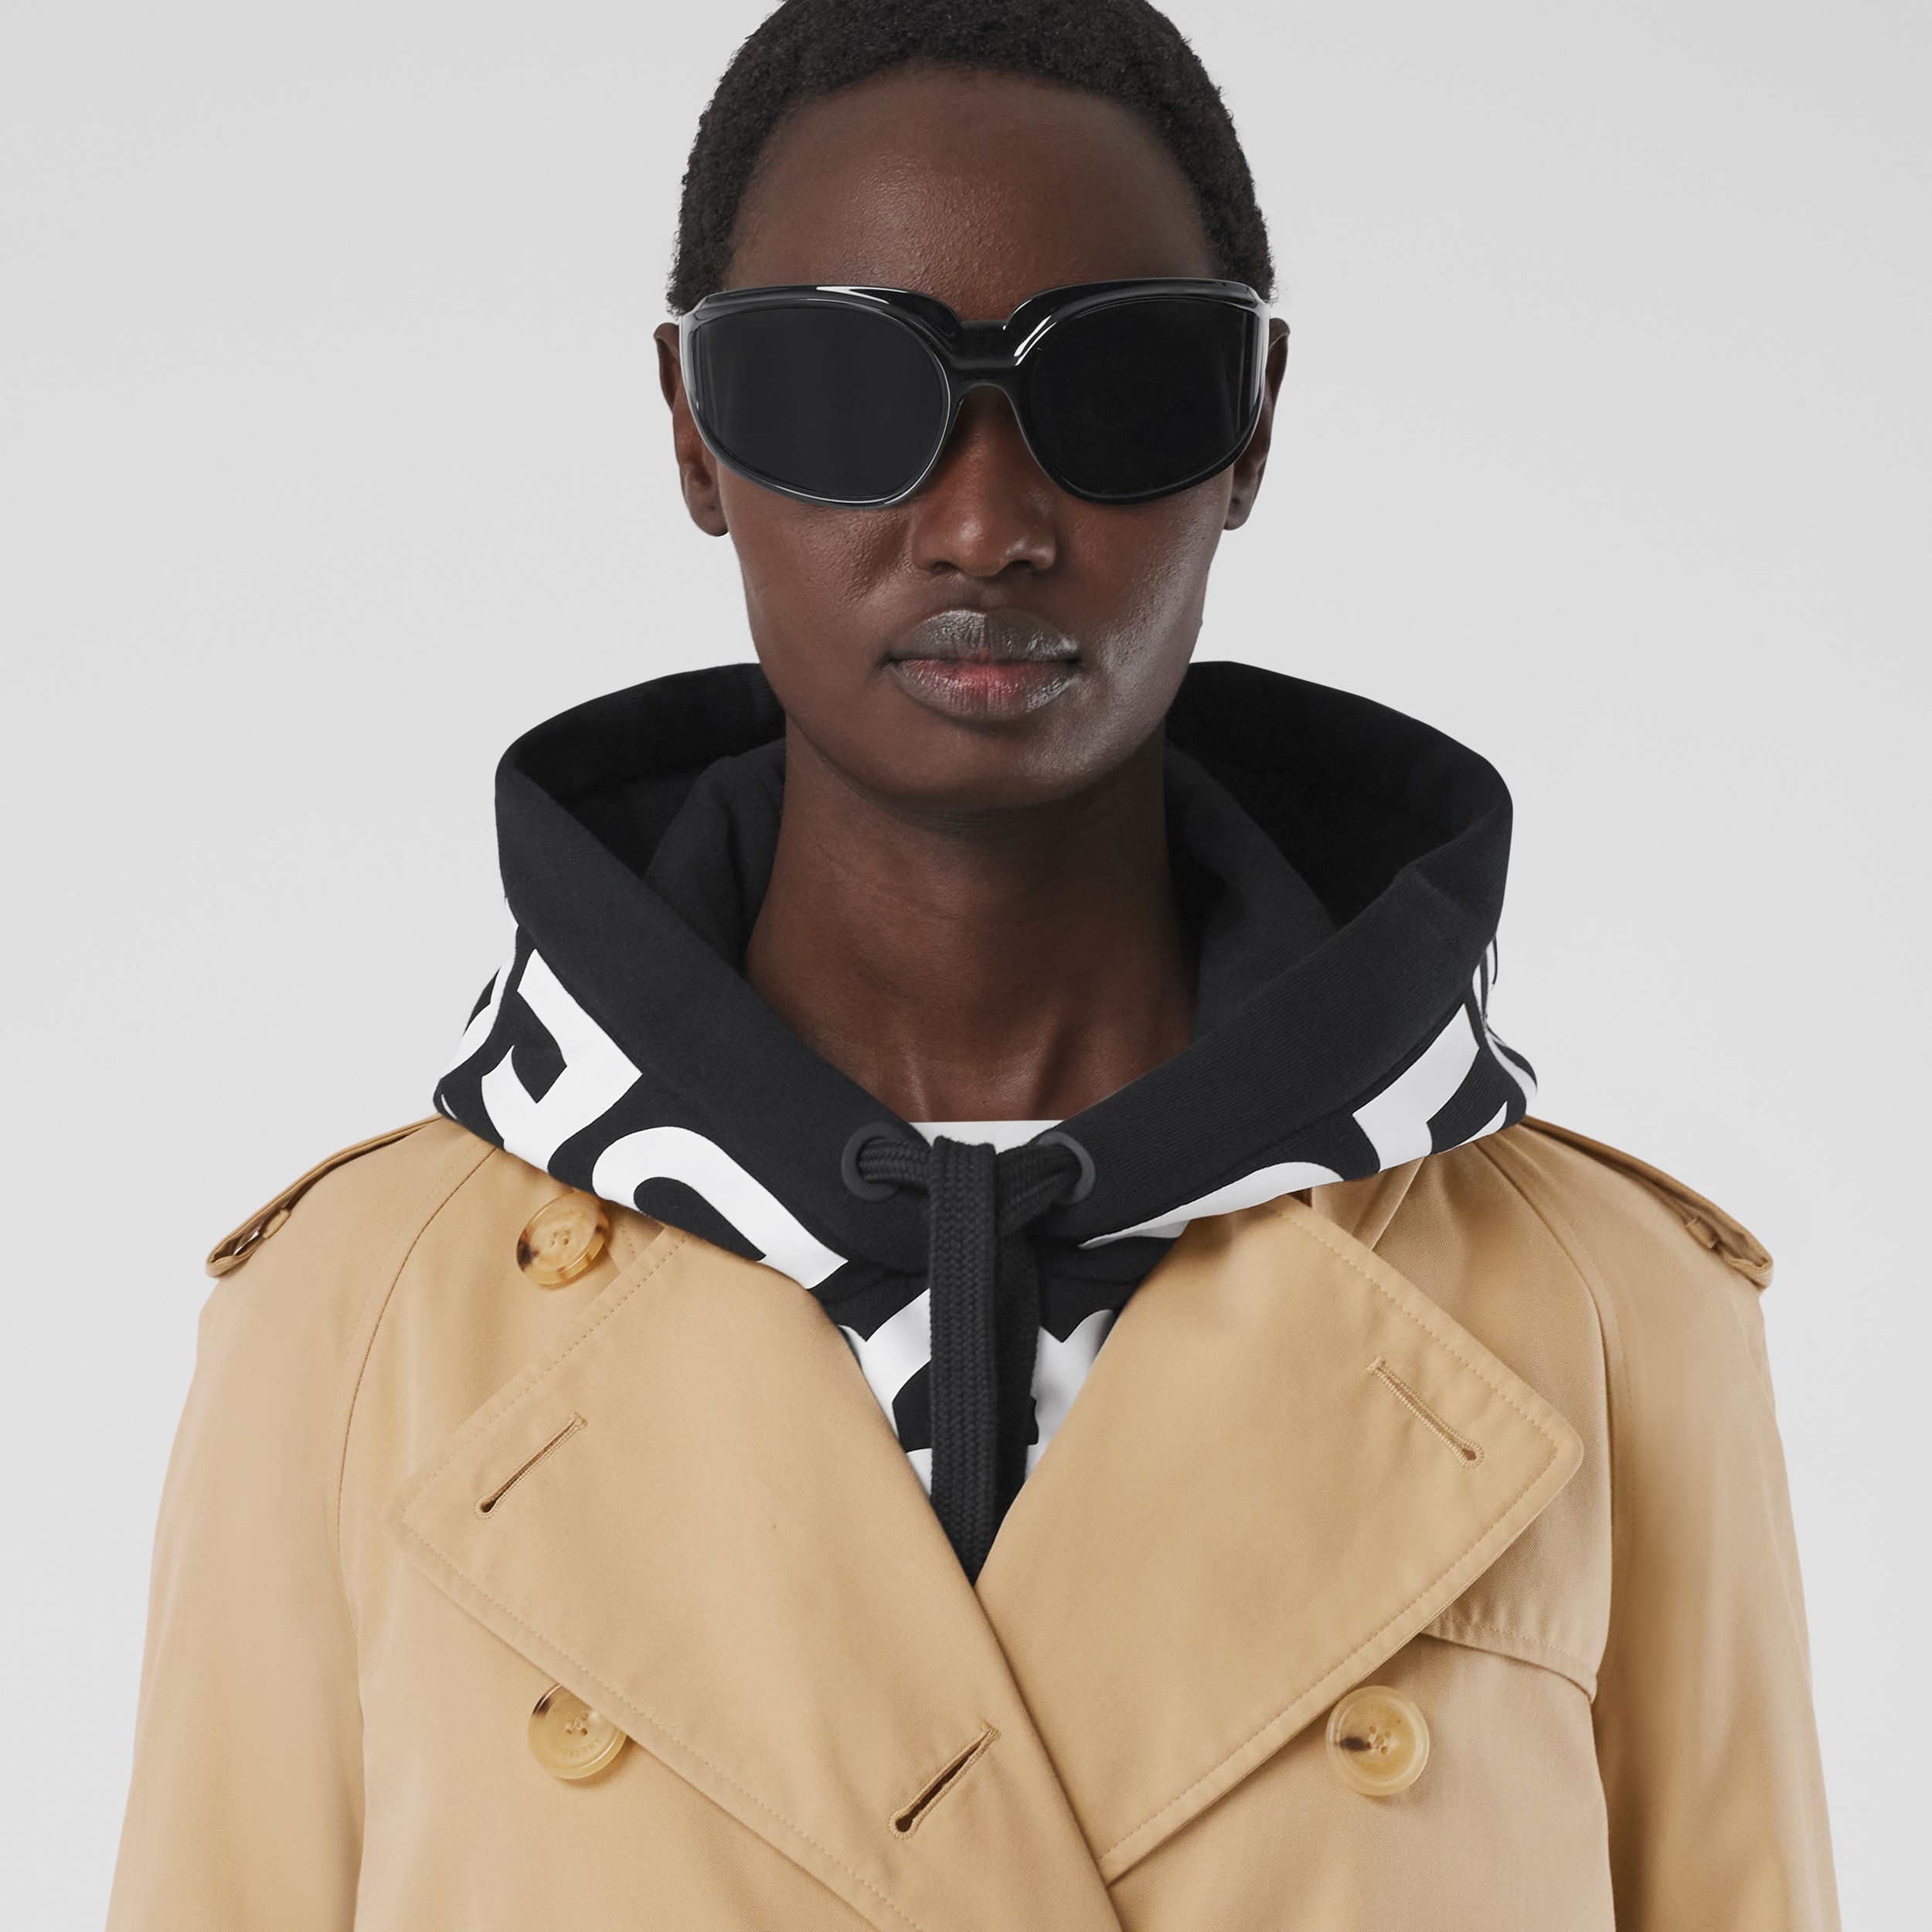 The Waterloo - Trench coat Heritage longo (Mel) - Mulheres | Burberry® oficial - 2